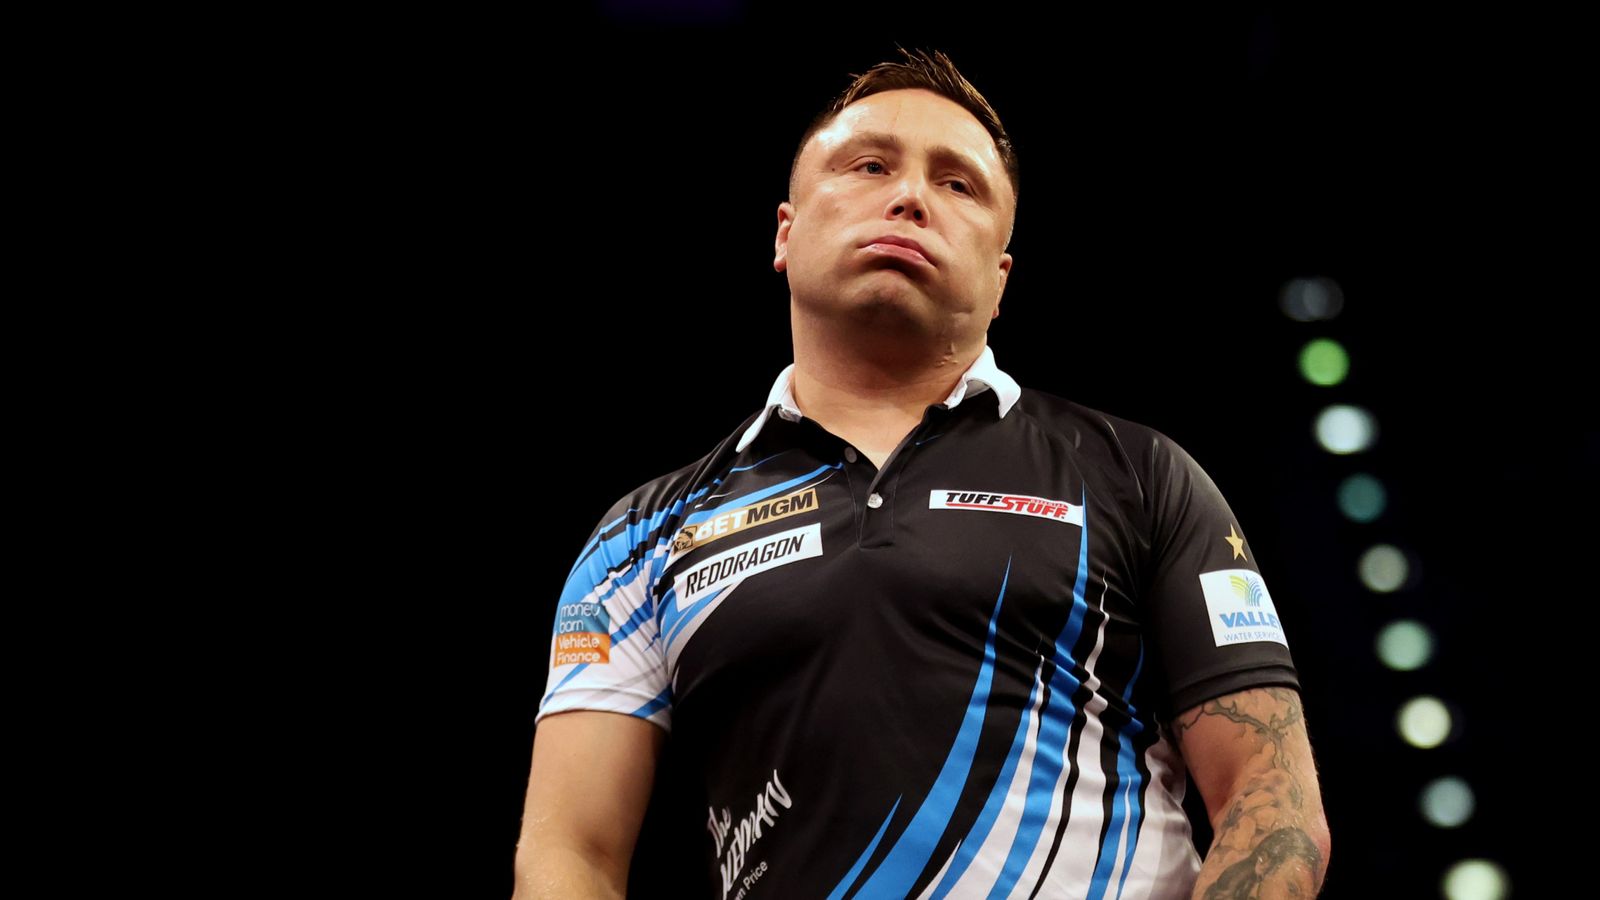 International Darts Open: Martin Schindler denies Gerwyn Price fifth title, claiming his first senior PDC title